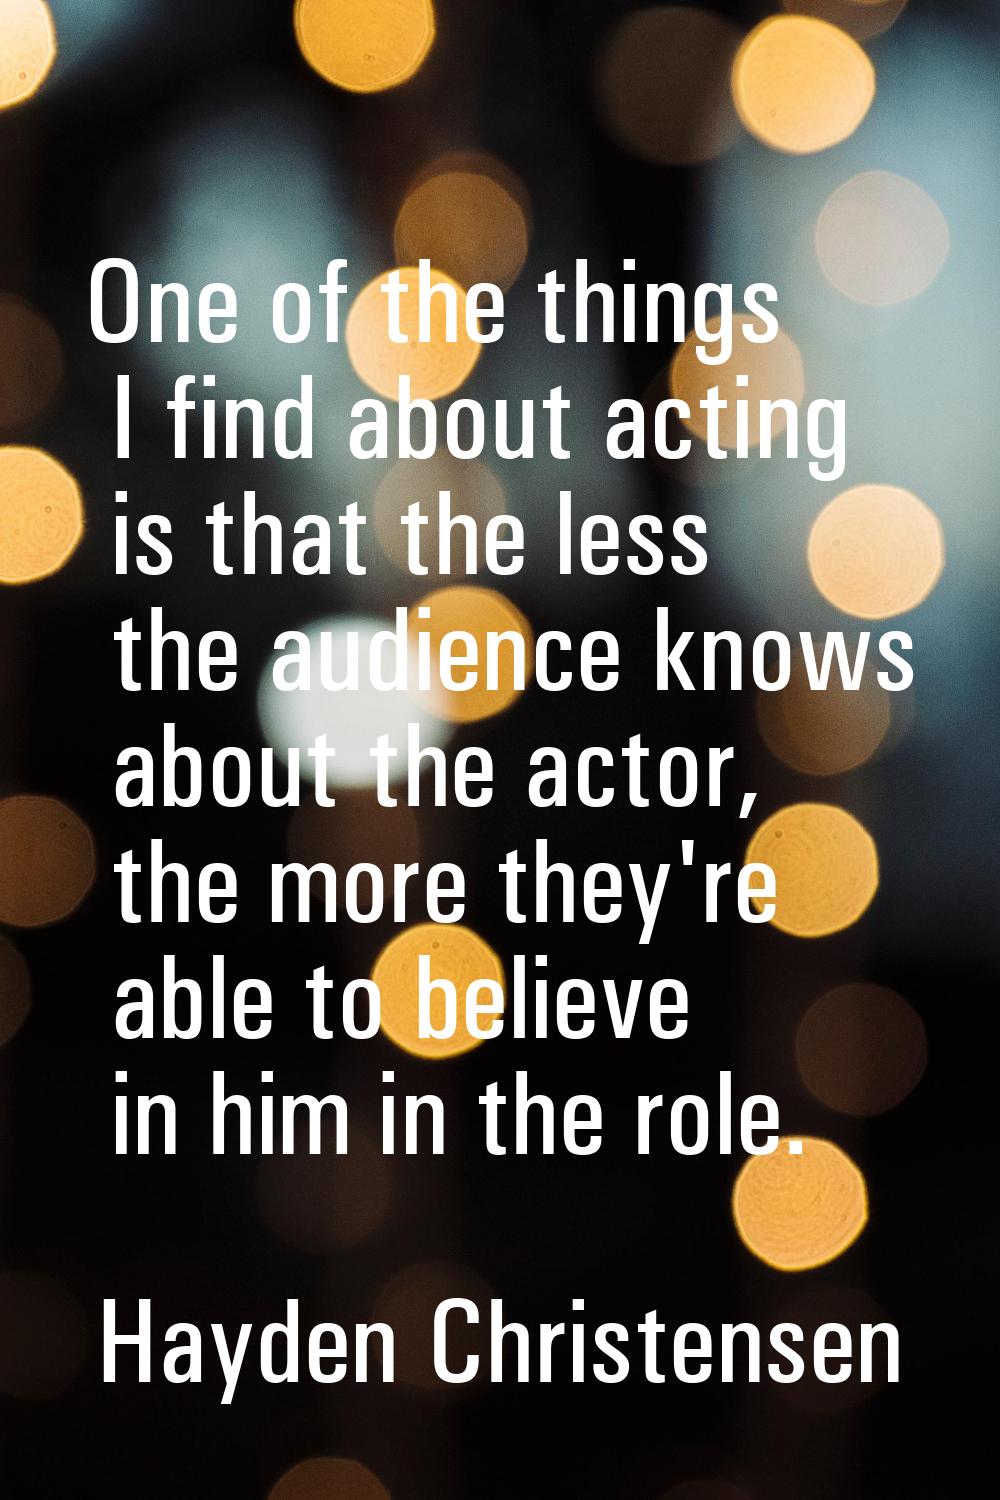 One of the things I find about acting is that the less the audience knows about the actor, the more